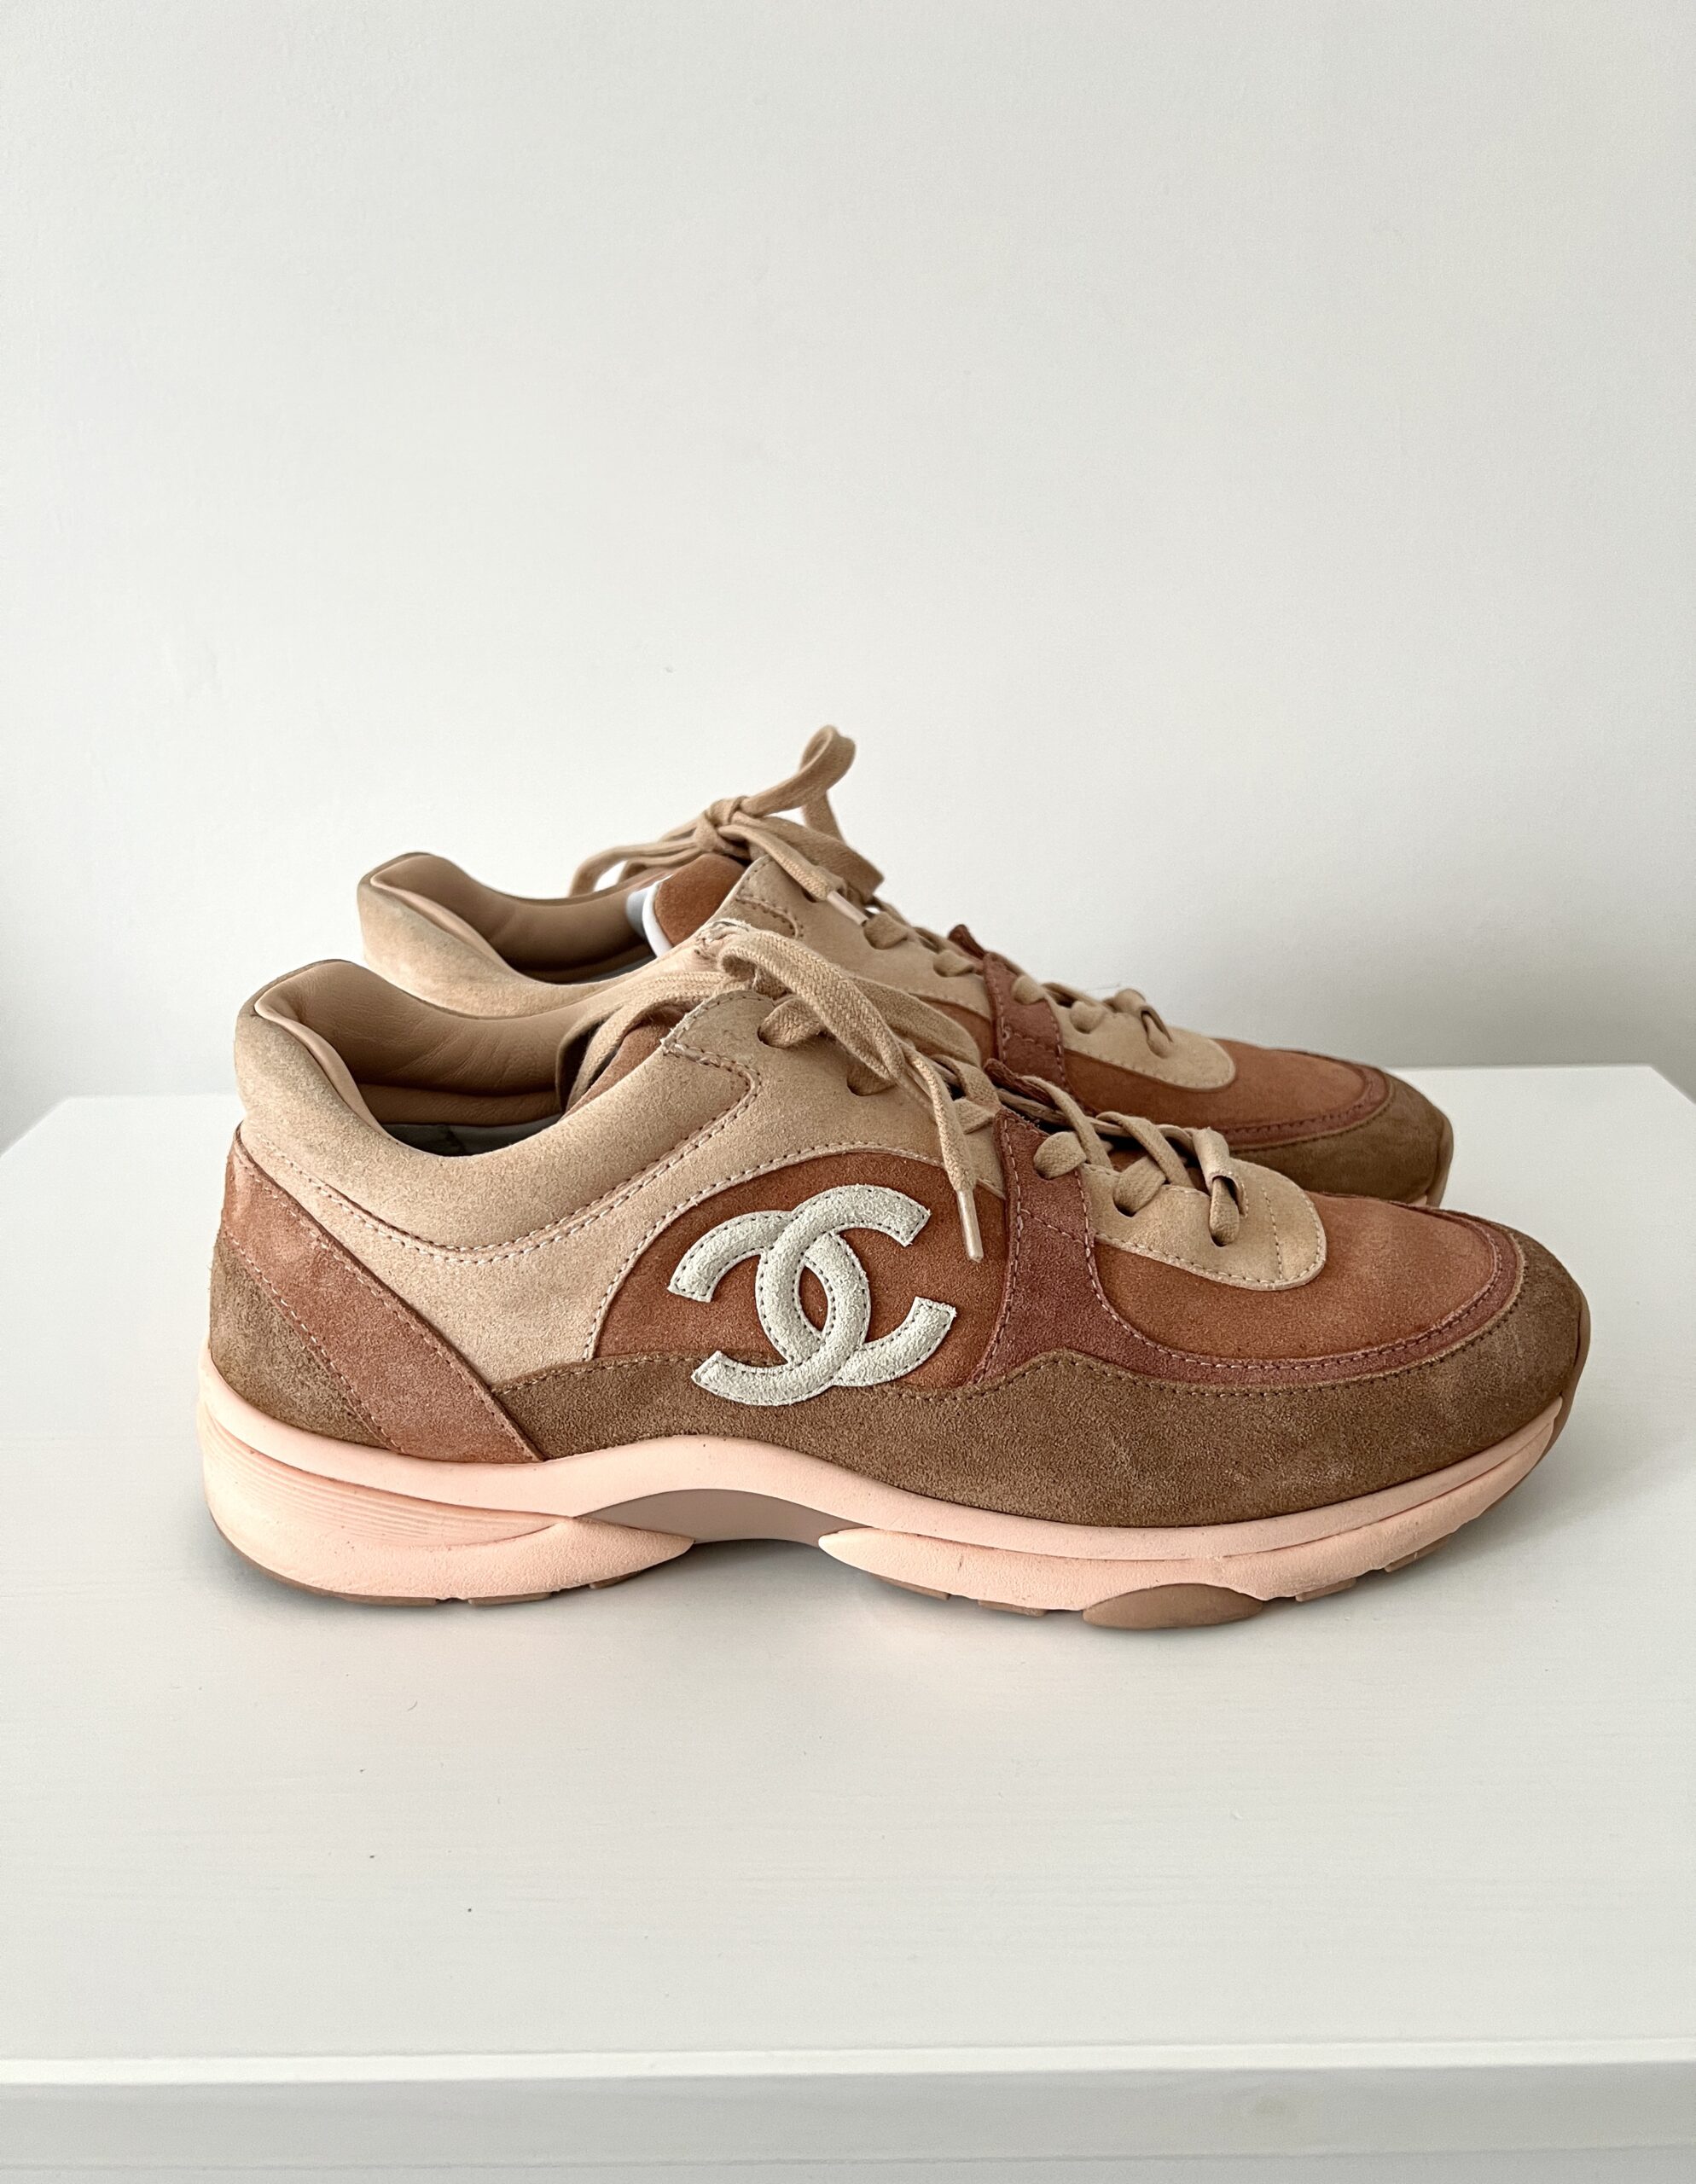 Chanel sneakers, sneakers, shoes, leather, size 41 - Vintage Dreams